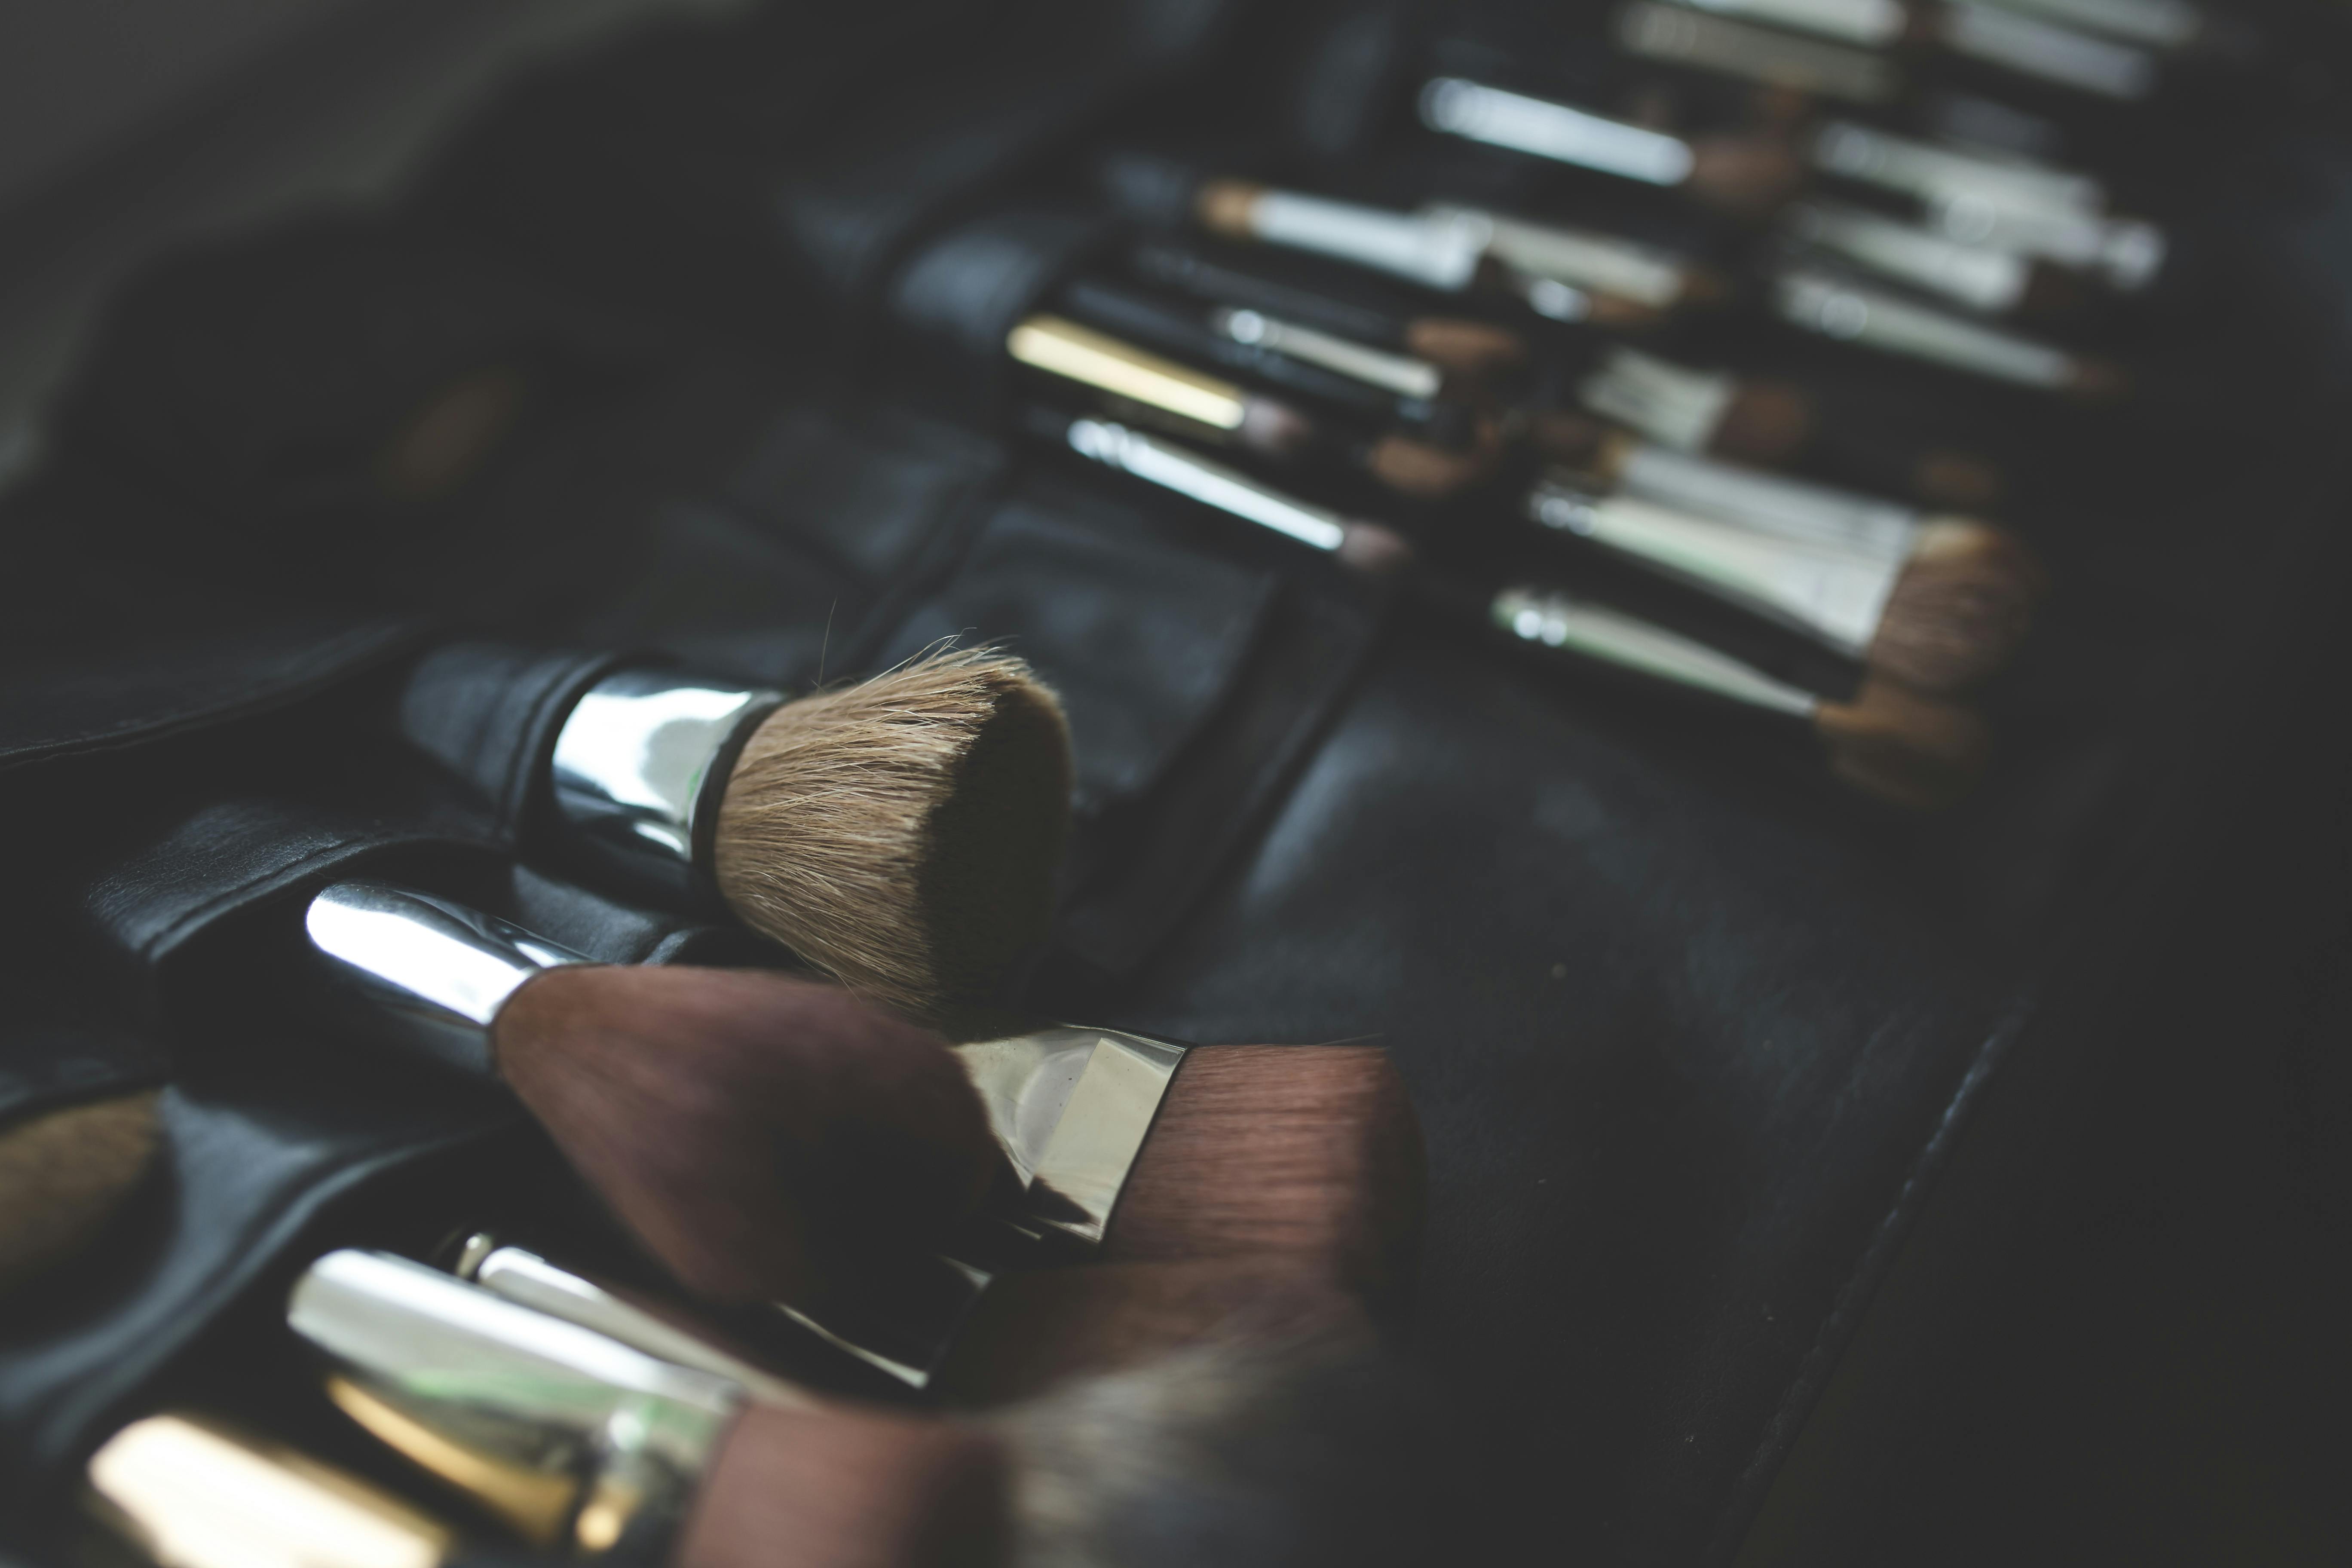 A bunch of make-up brushes